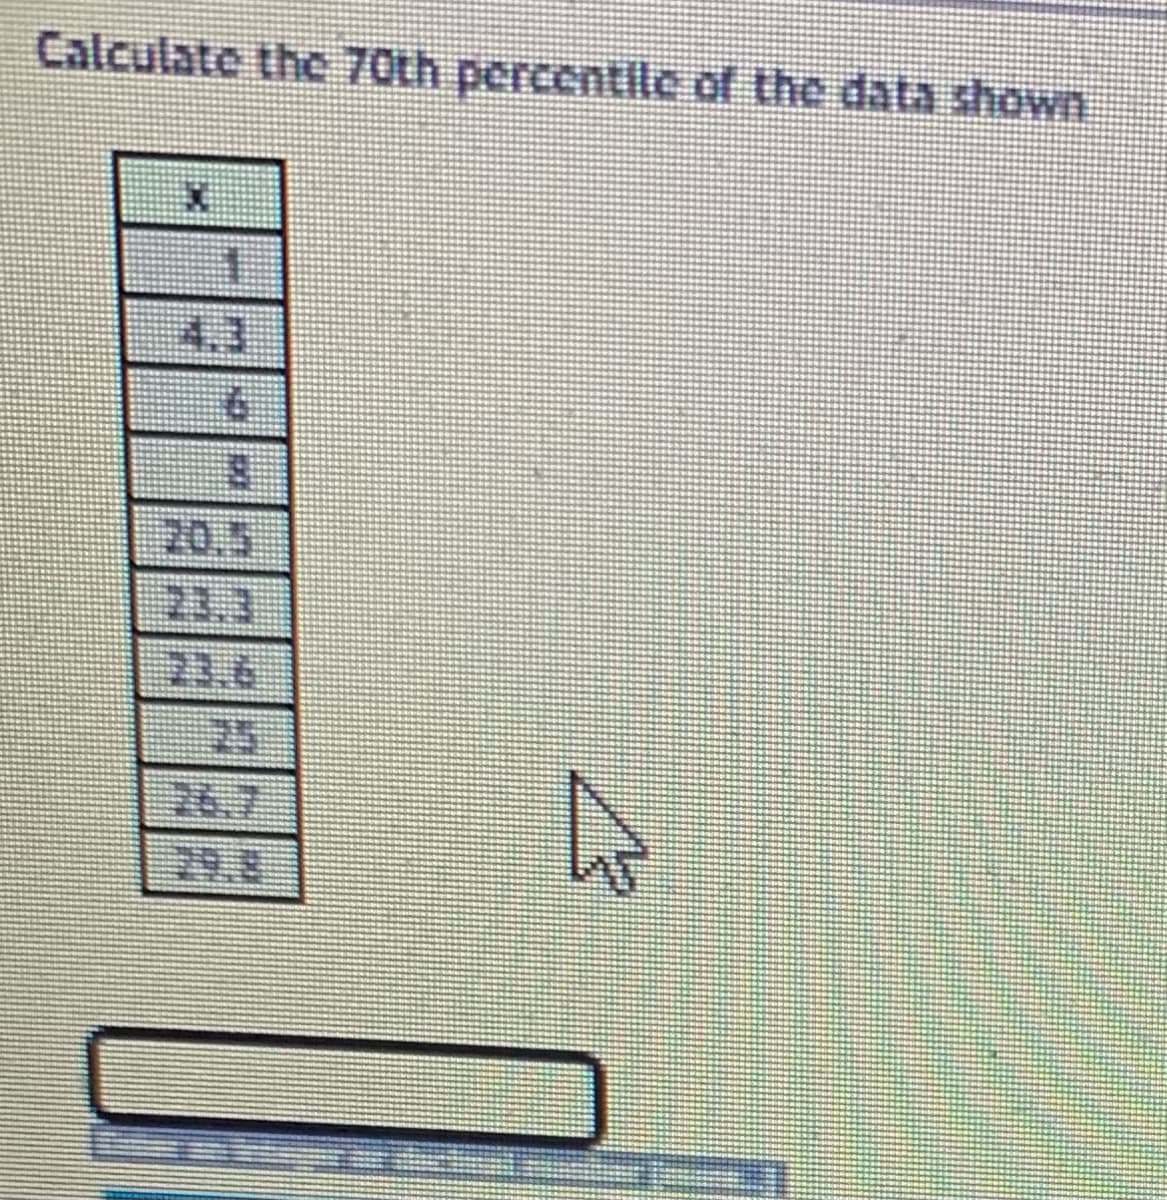 Calculate thc 70th percentile of the data shown
4.3
9.
20.5
23.3
23.6
25
26.7
29.8
